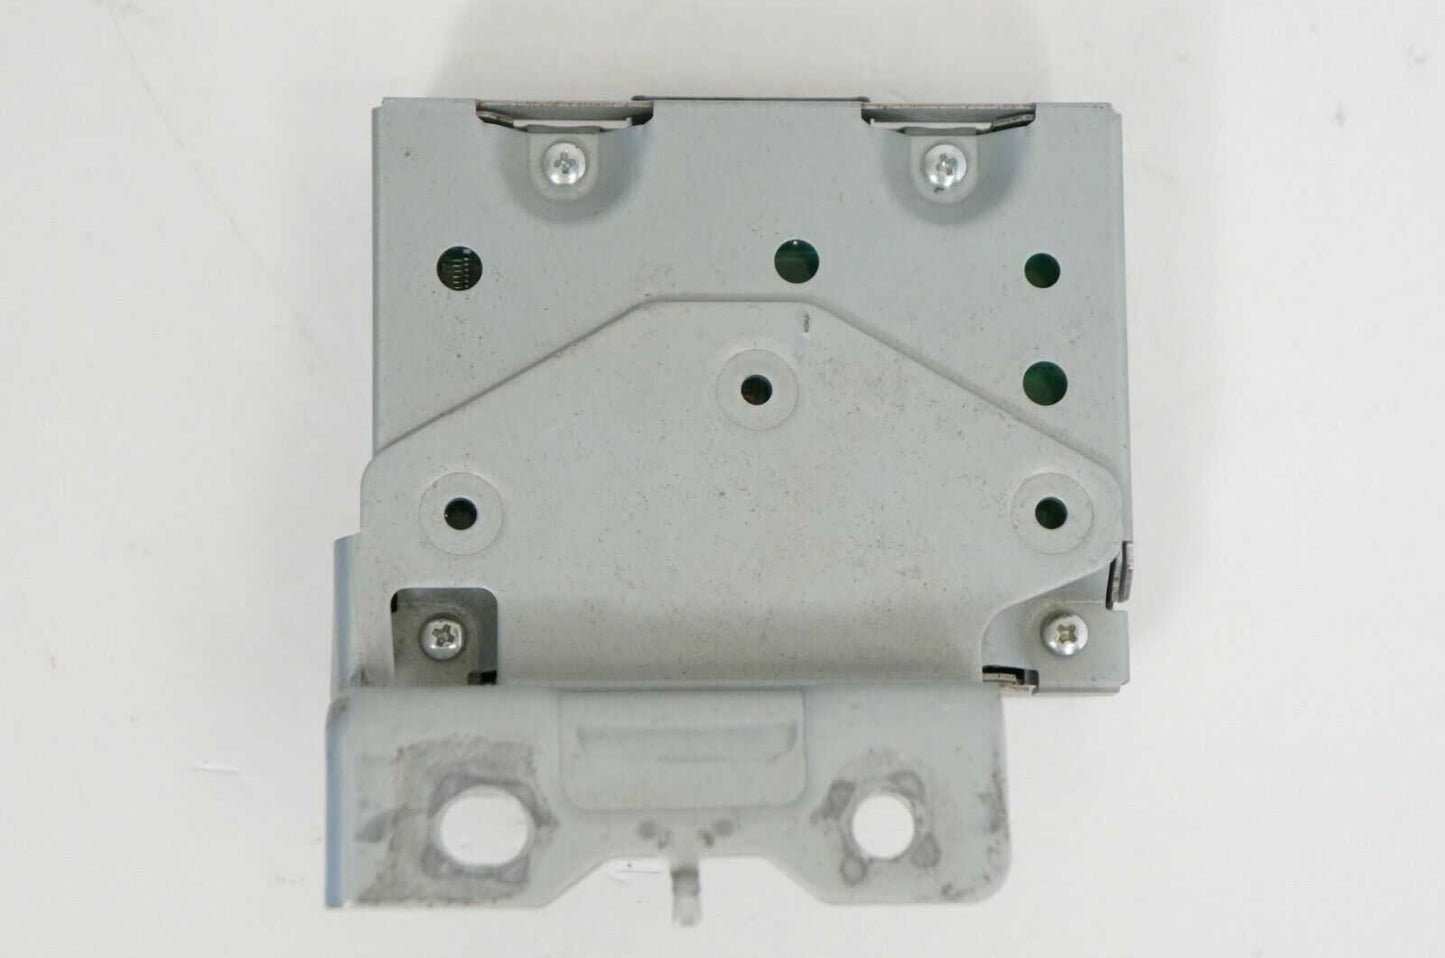 2013-2015 HONDA ACCORD Factory ANTENNA CONTROL MODULE 39200-T3L-A812-M1 OEM Alshned Auto Parts